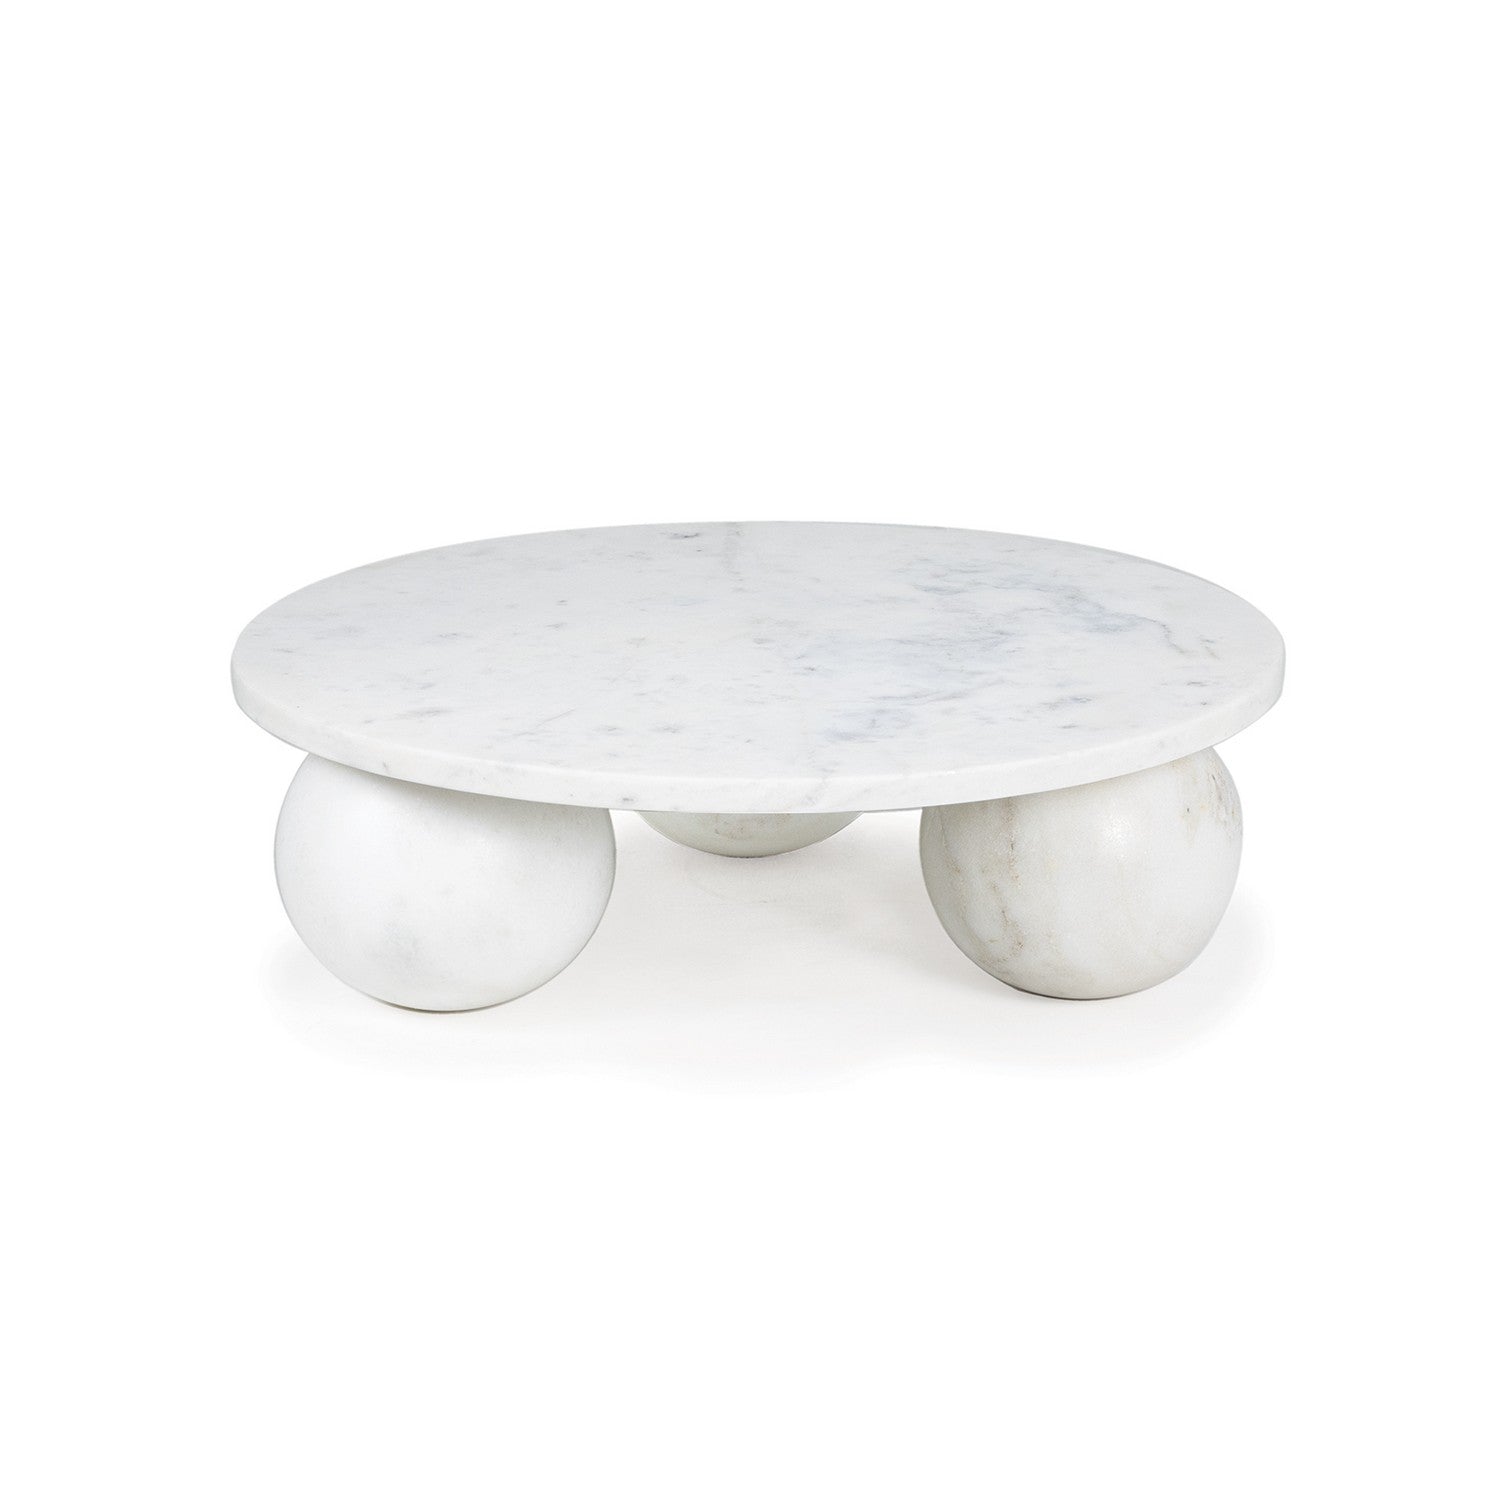 Regina Andrew - 20-1537WT - Marble Plate - Marlow - White